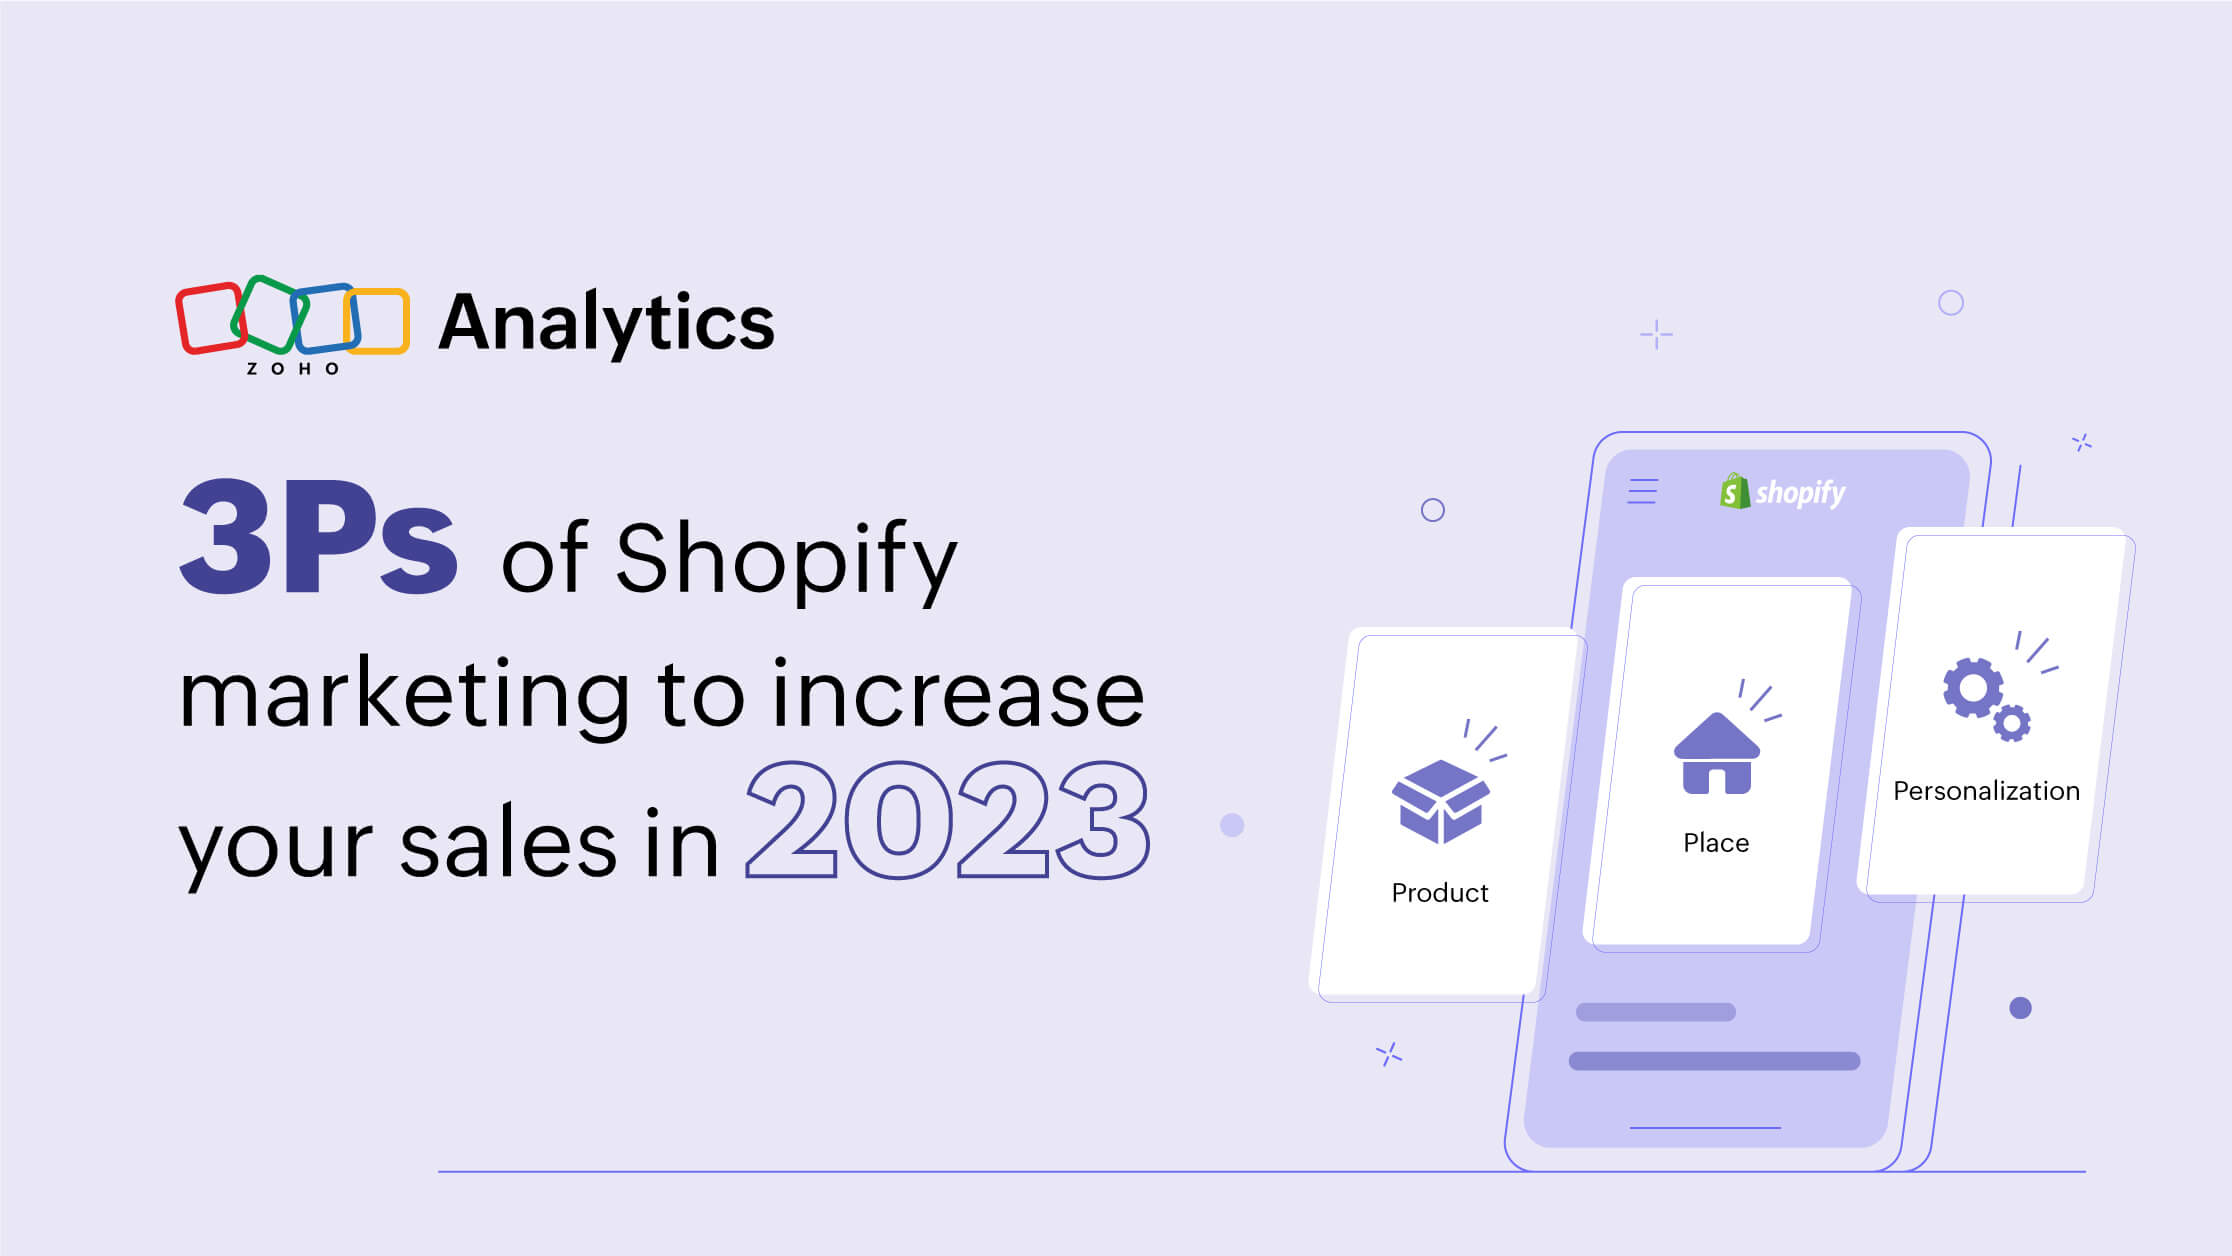 The 3Ps of Shopify marketing to increase your sales in 2023